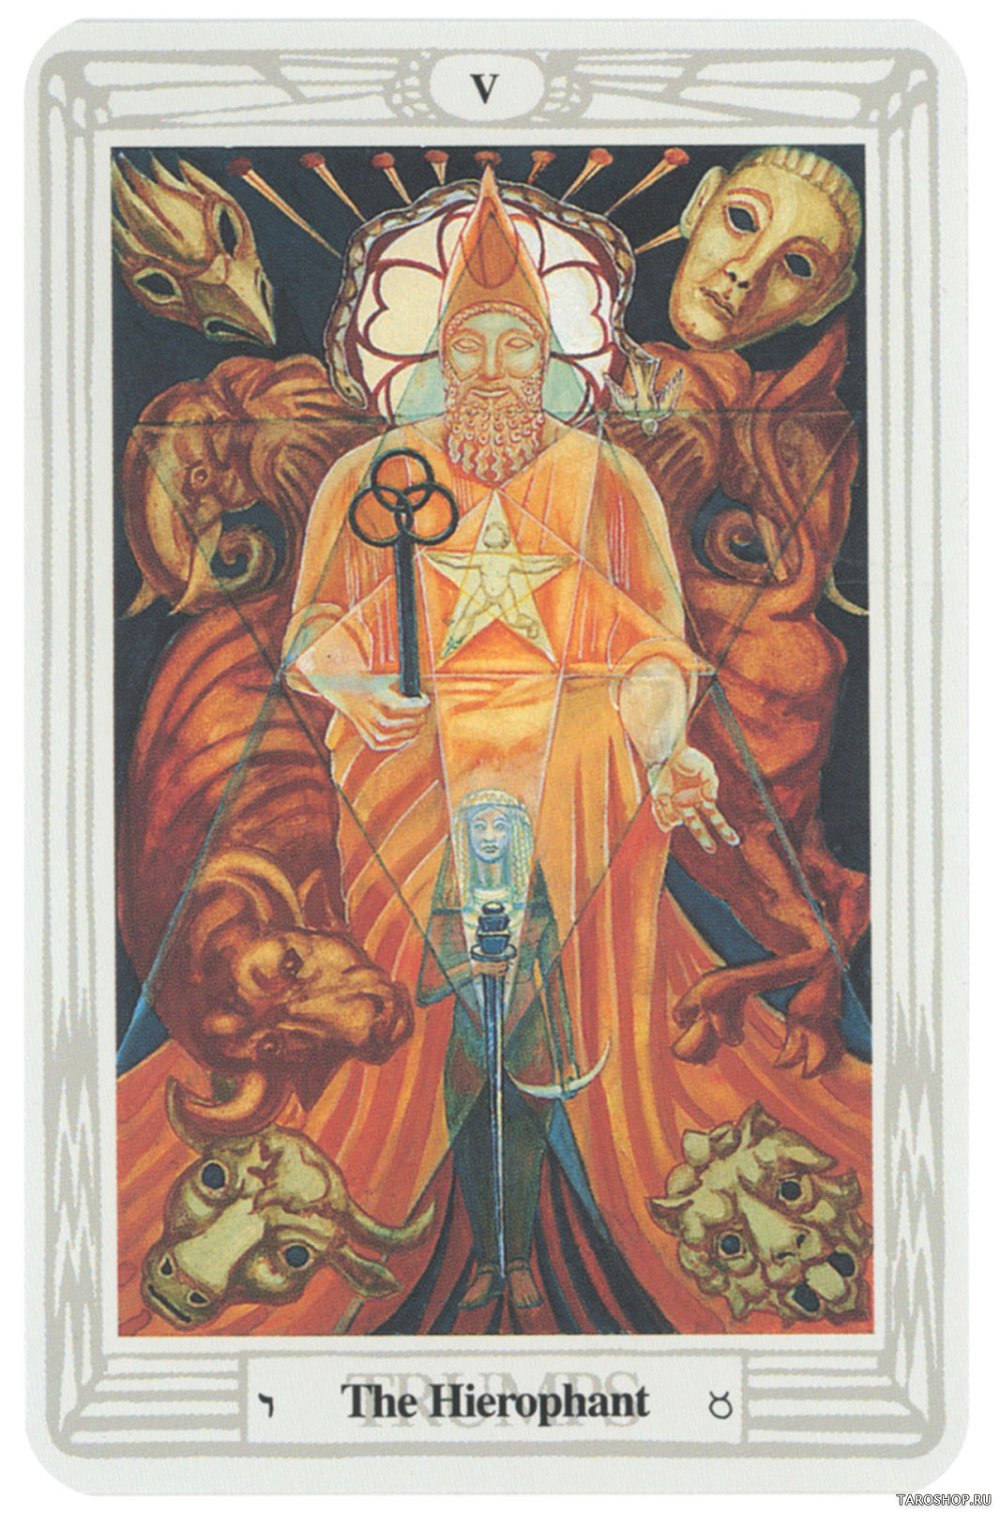 Crowley Gold Edition. Aleister Crowley Deluxe Tarot: Gilded Deck & Book Set